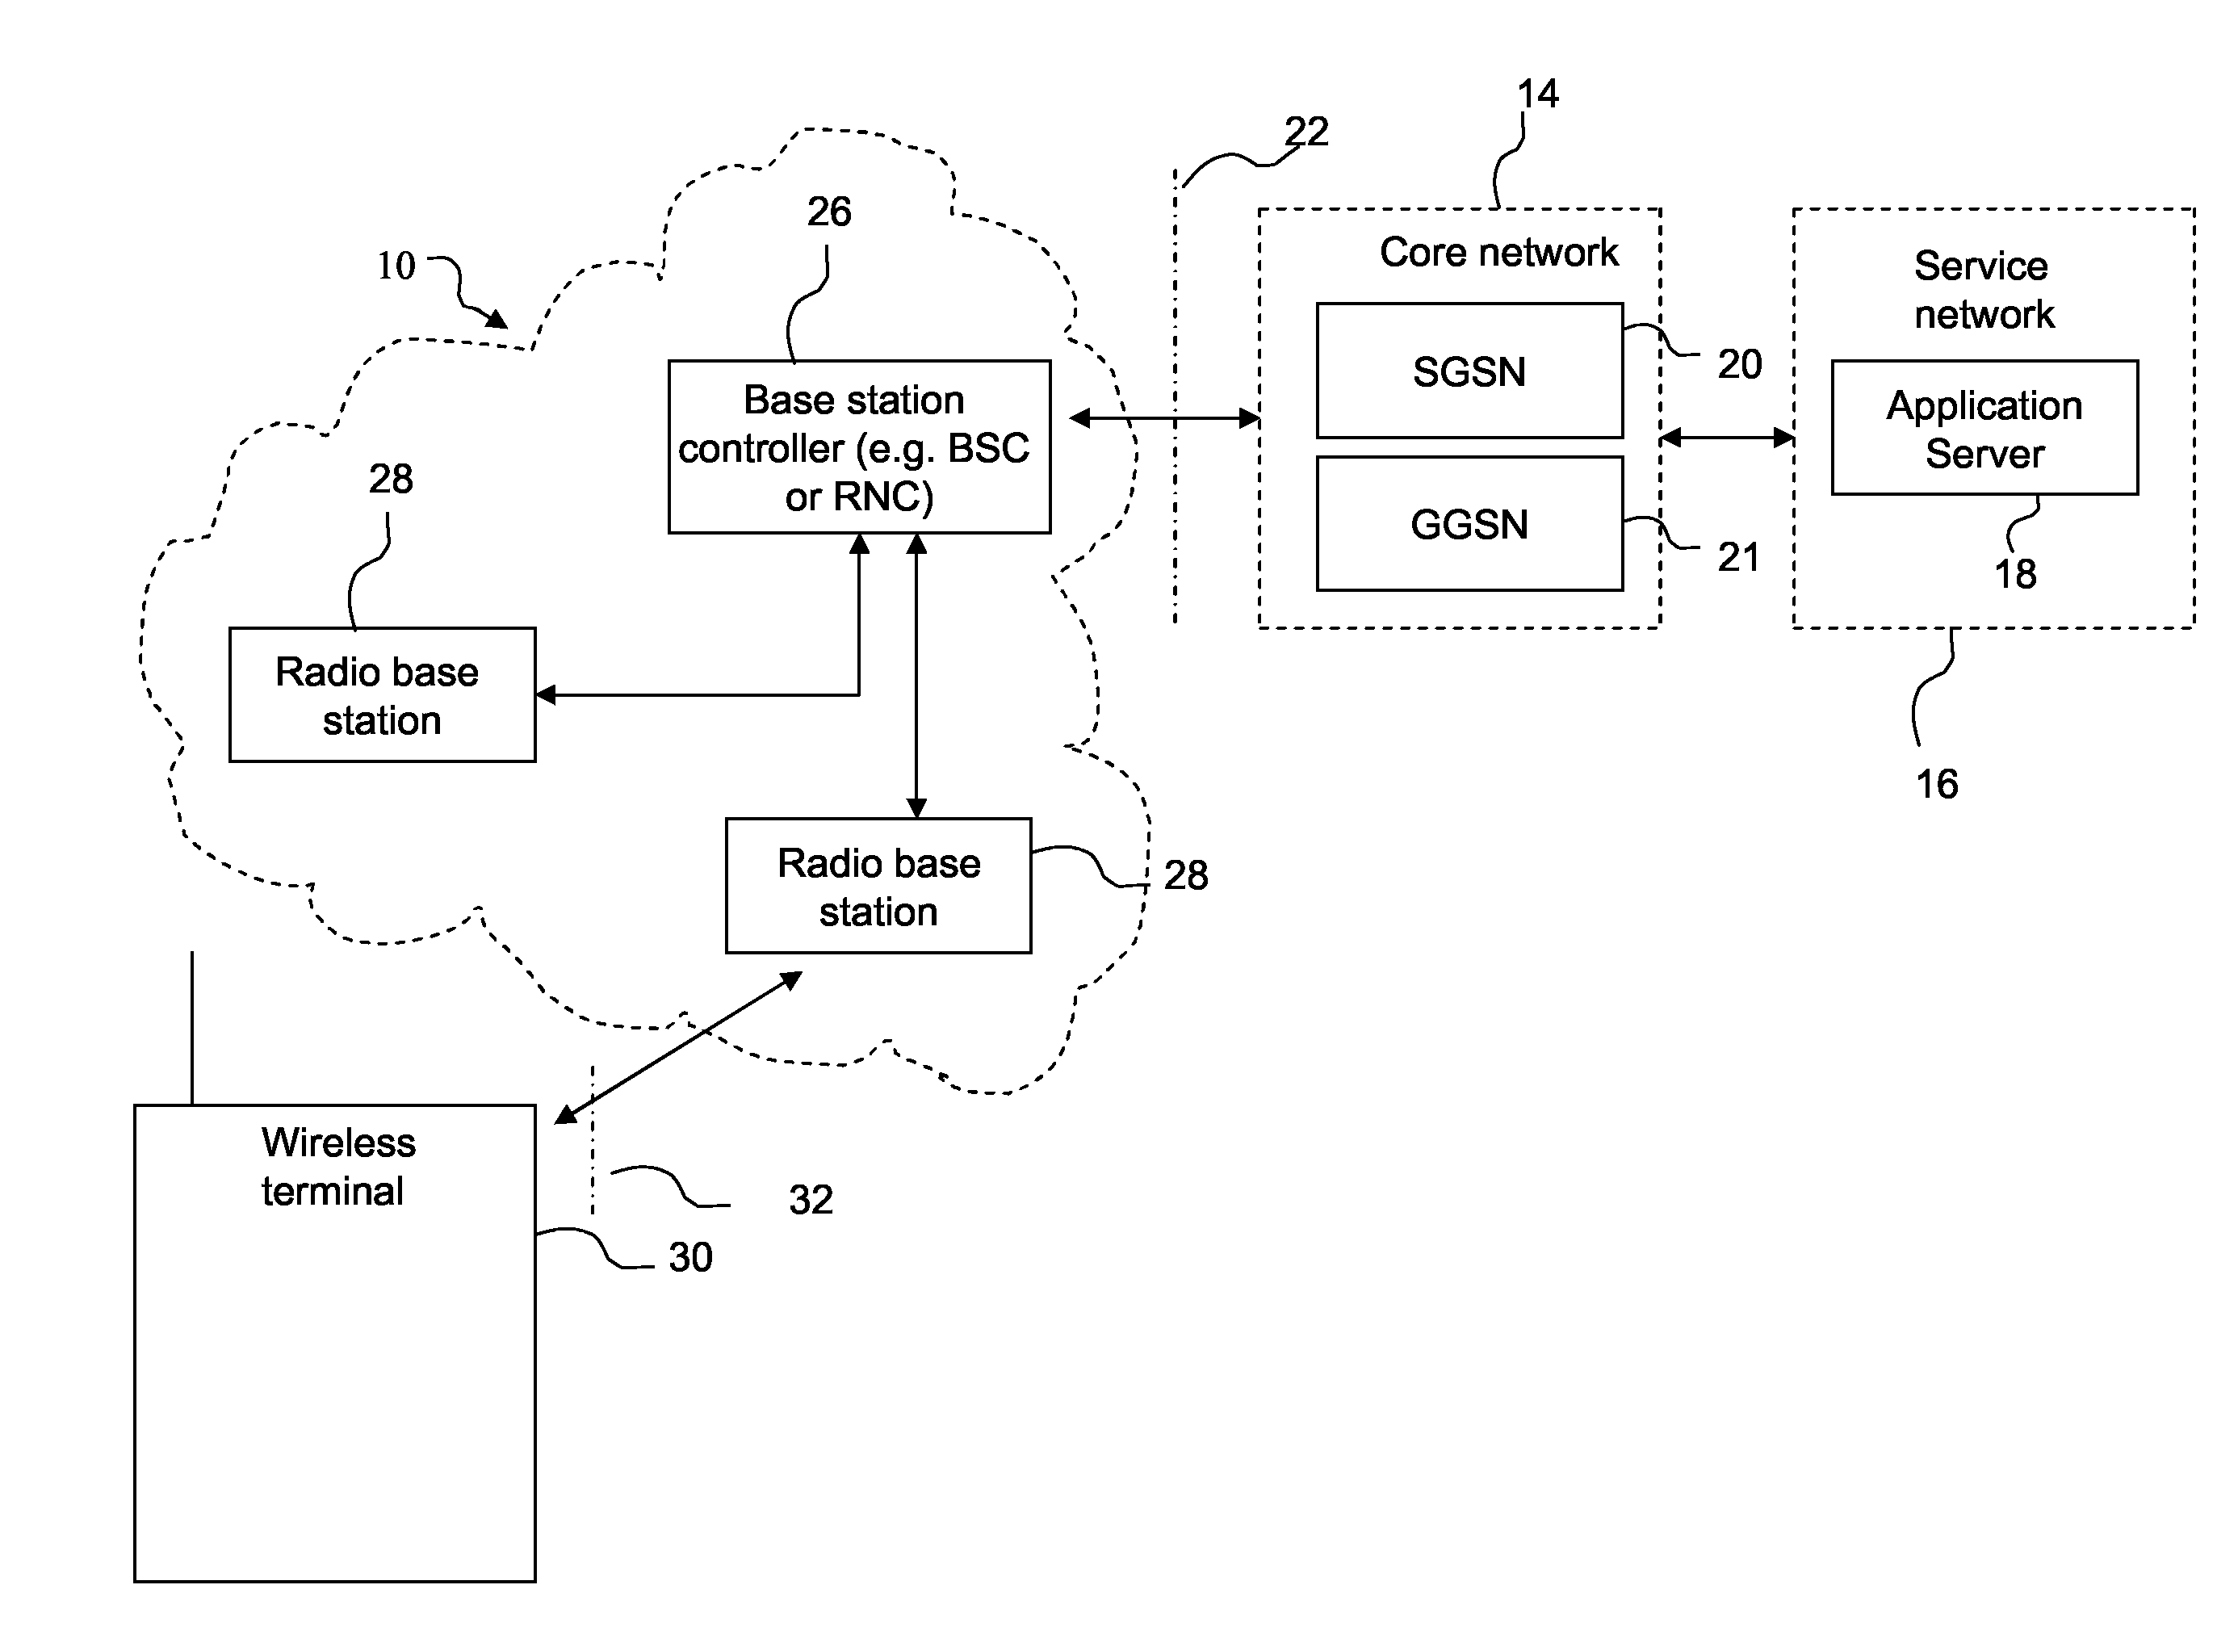 METHOD FOR SCHEDULING VoIP TRAFFIC FLOWS